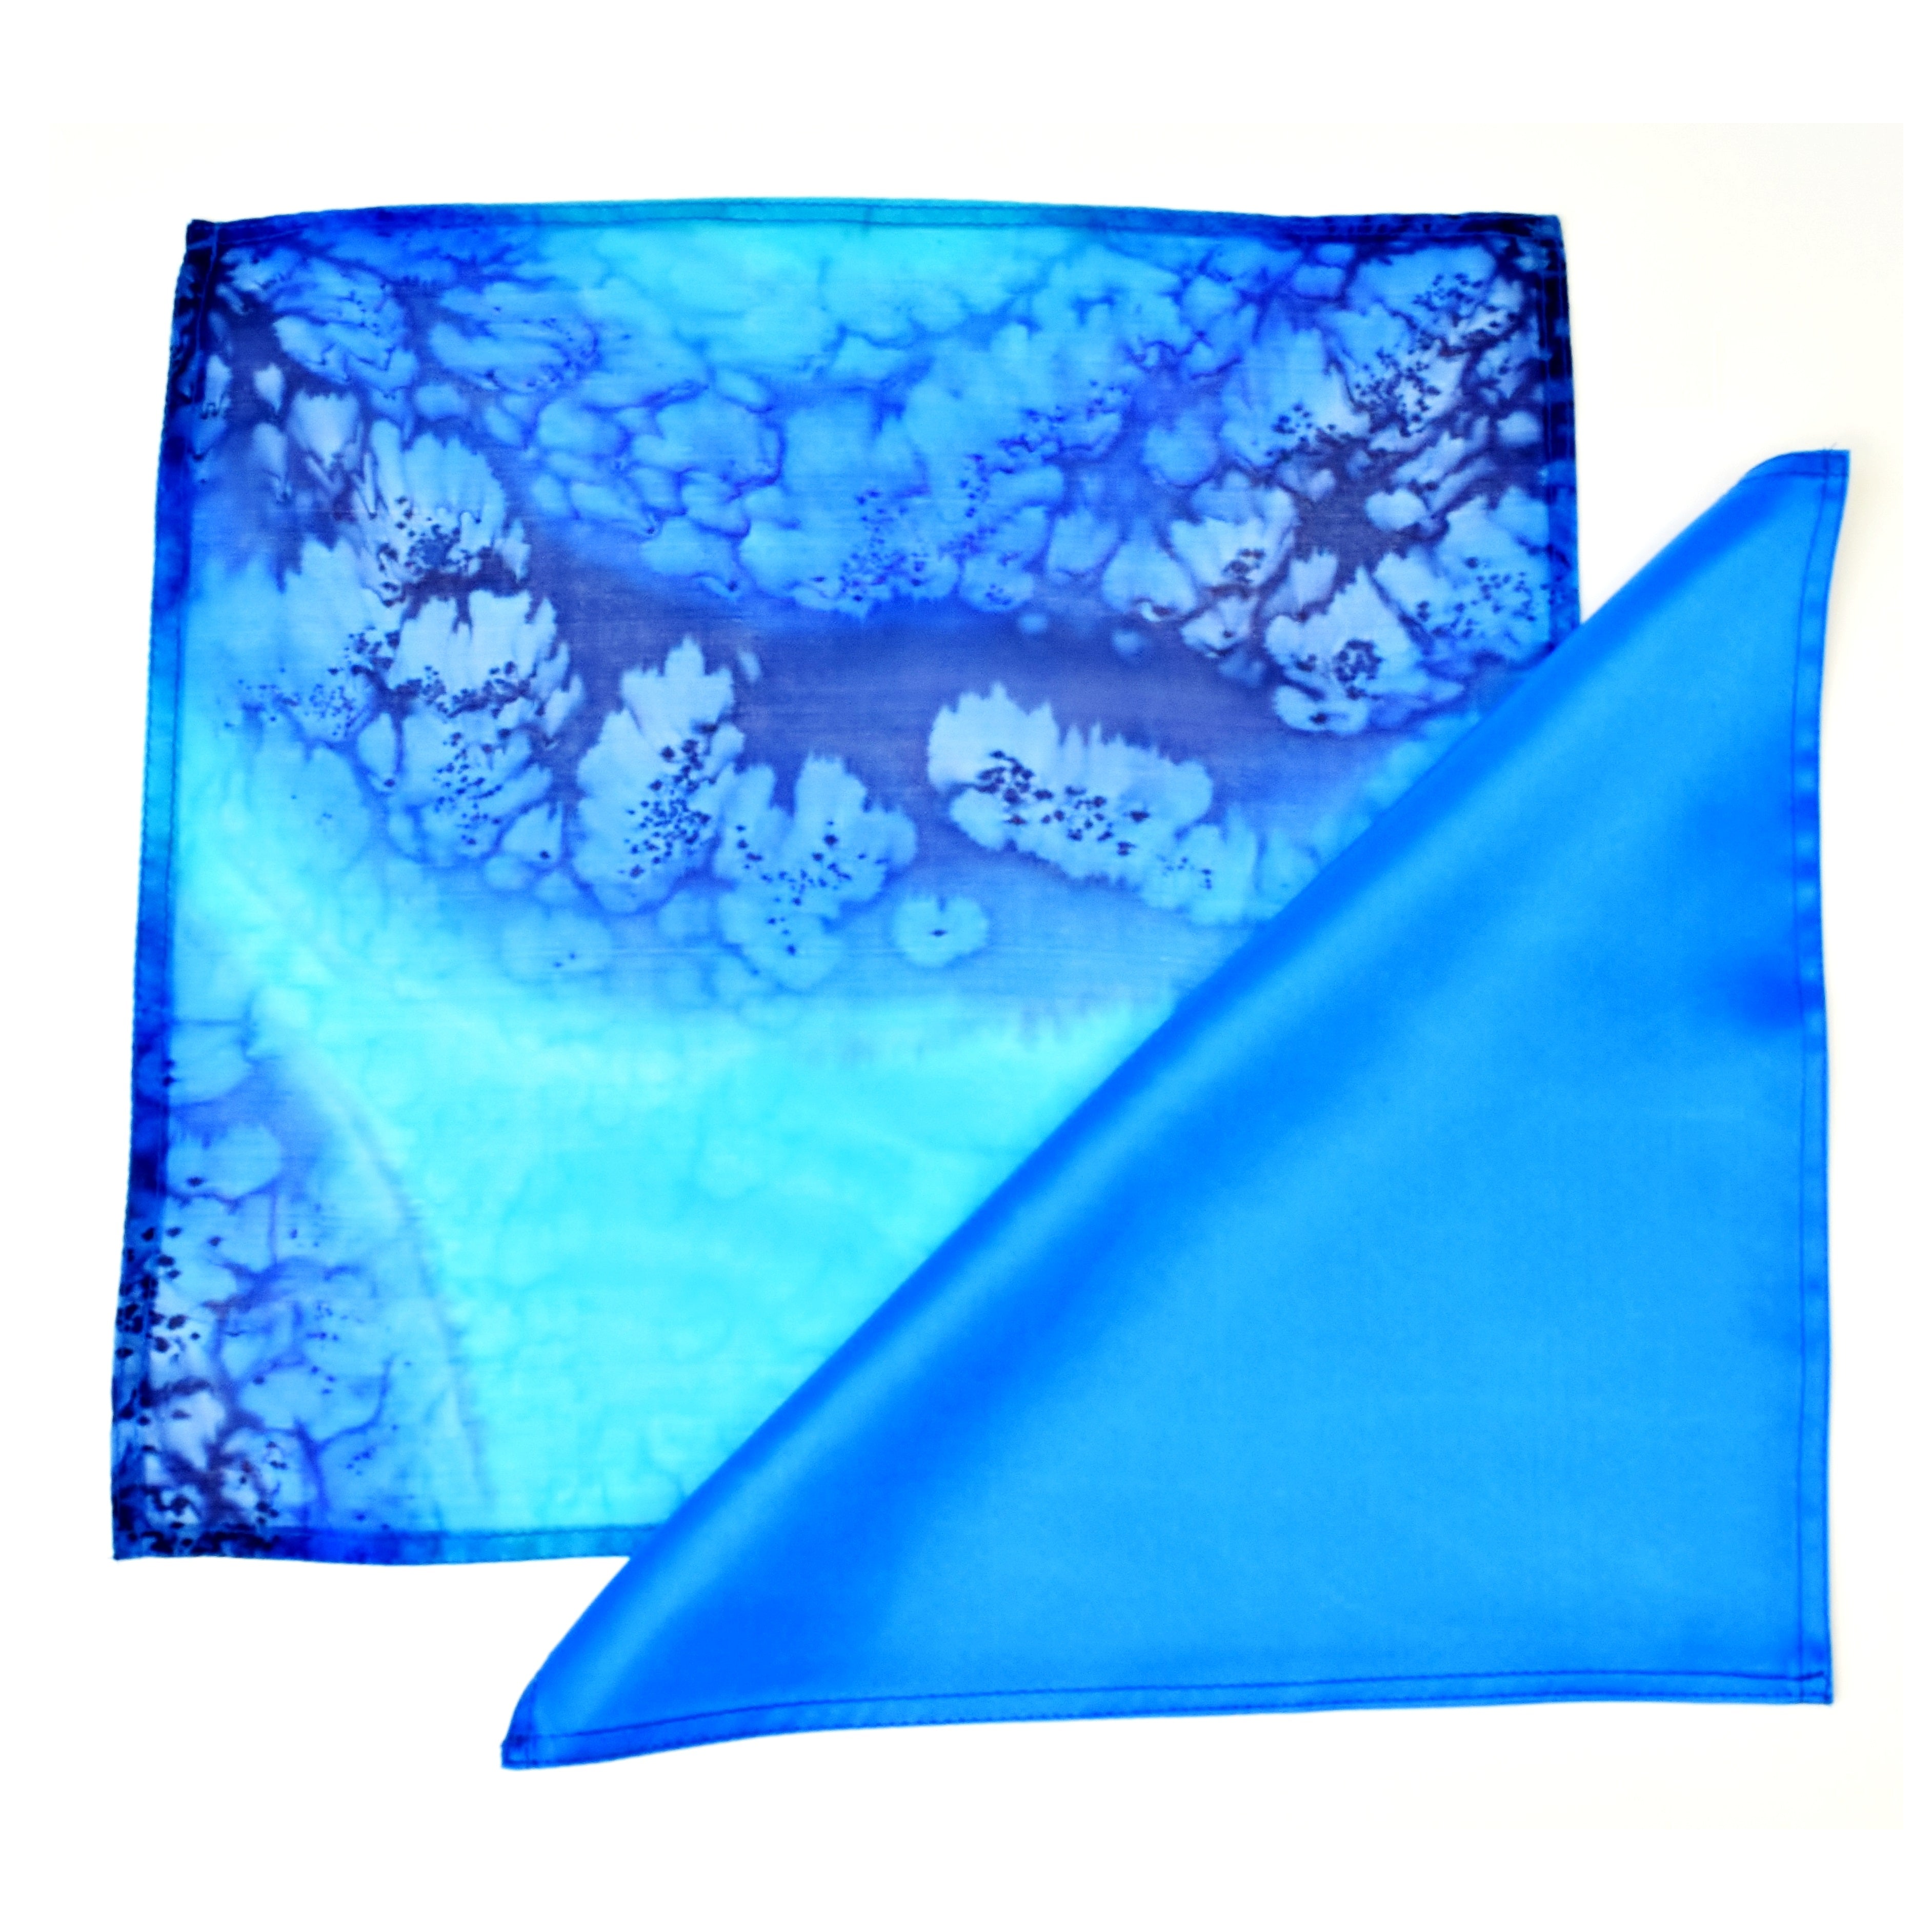 Blue satin and turquoise painted silk pocket square set for Men's fashion handmade by Lynne Kiel